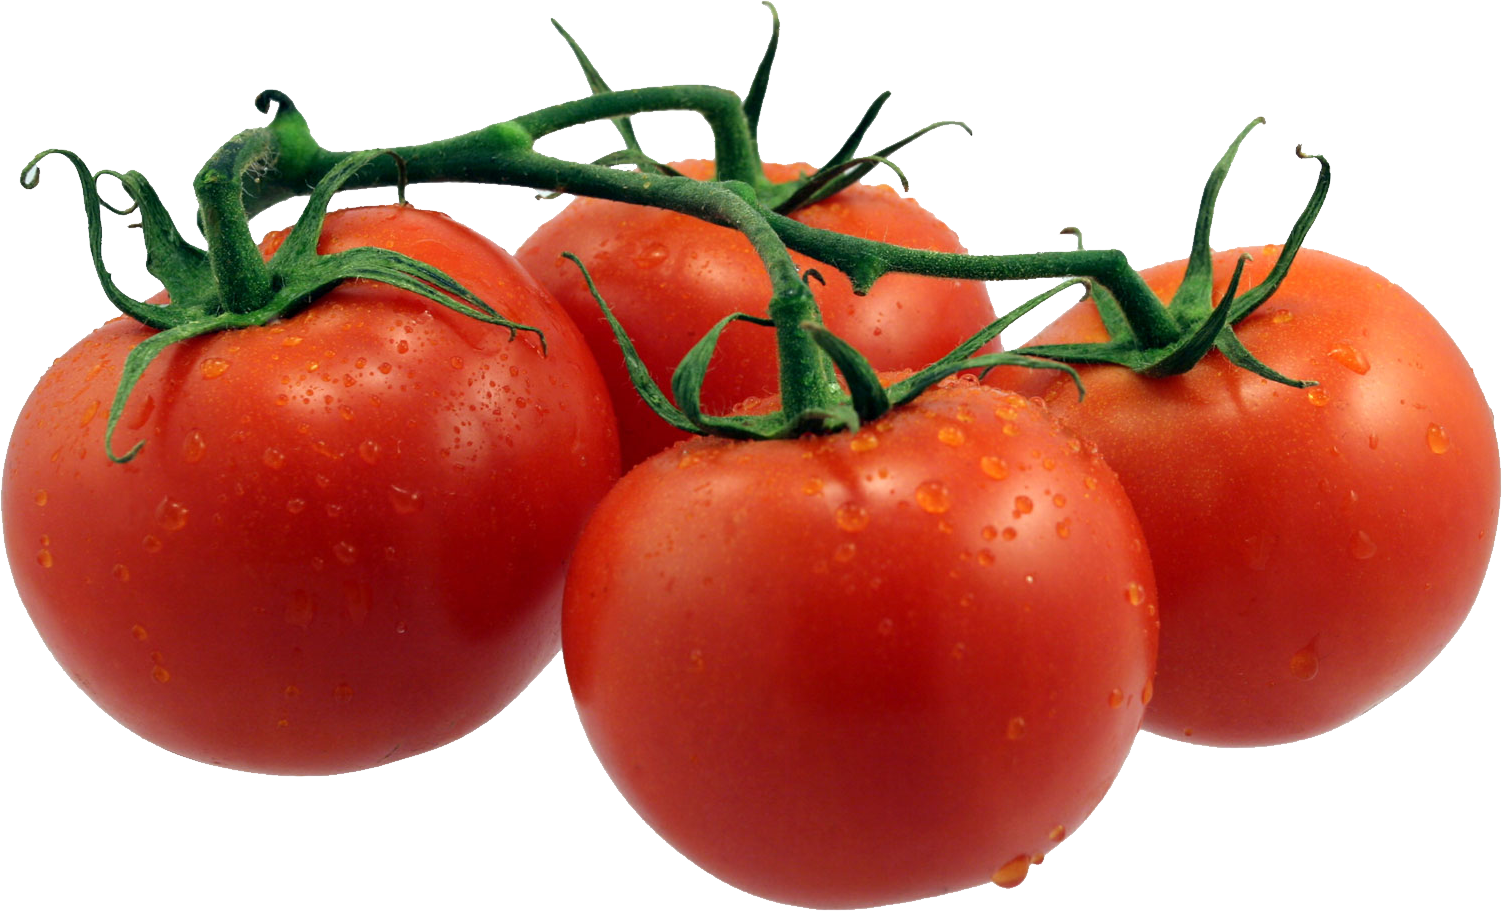 Fresh Tomatoes Bunch HQ Image Free PNG Image